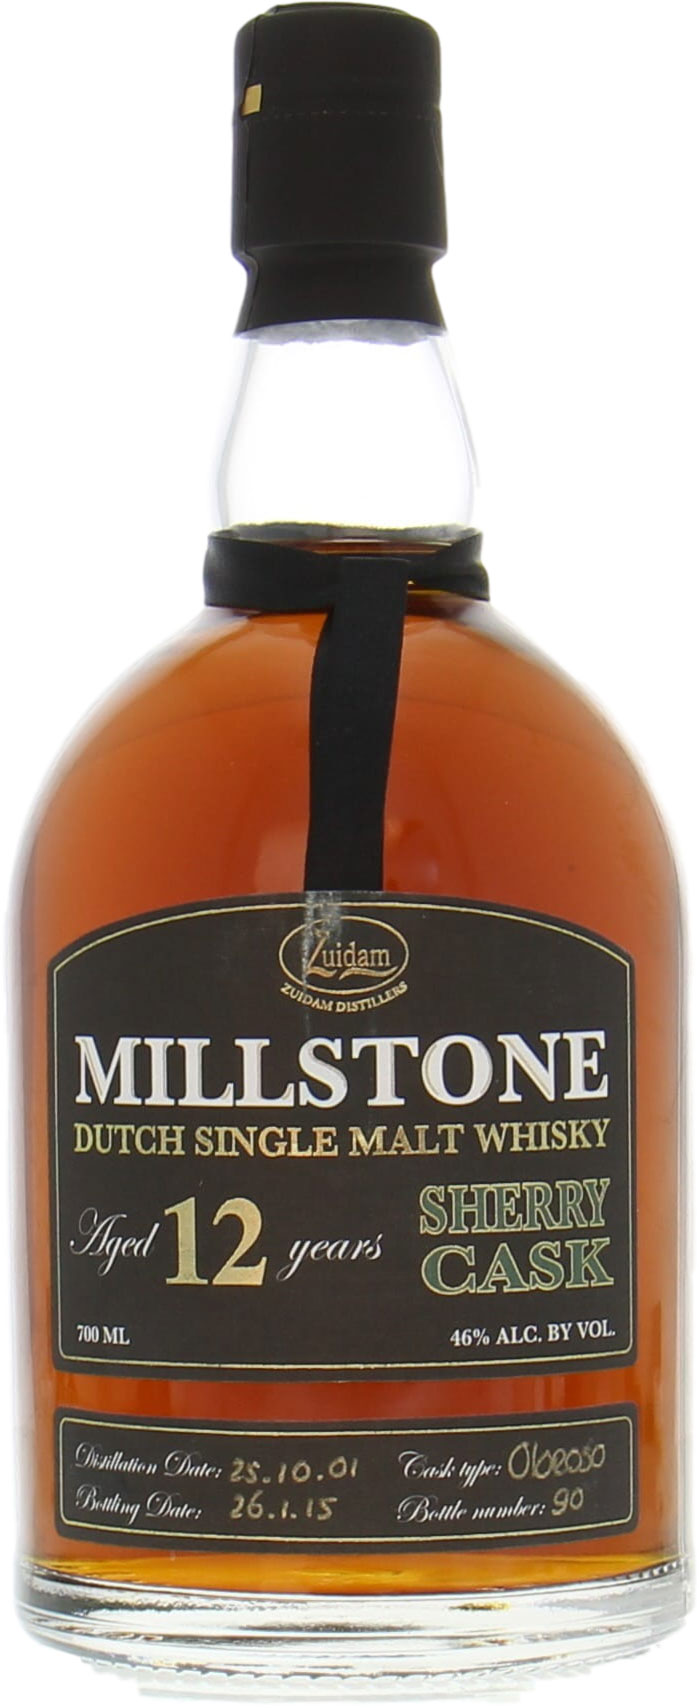 Millstone - 12 Years Old Sherry Cask 43% 2001 Perfect